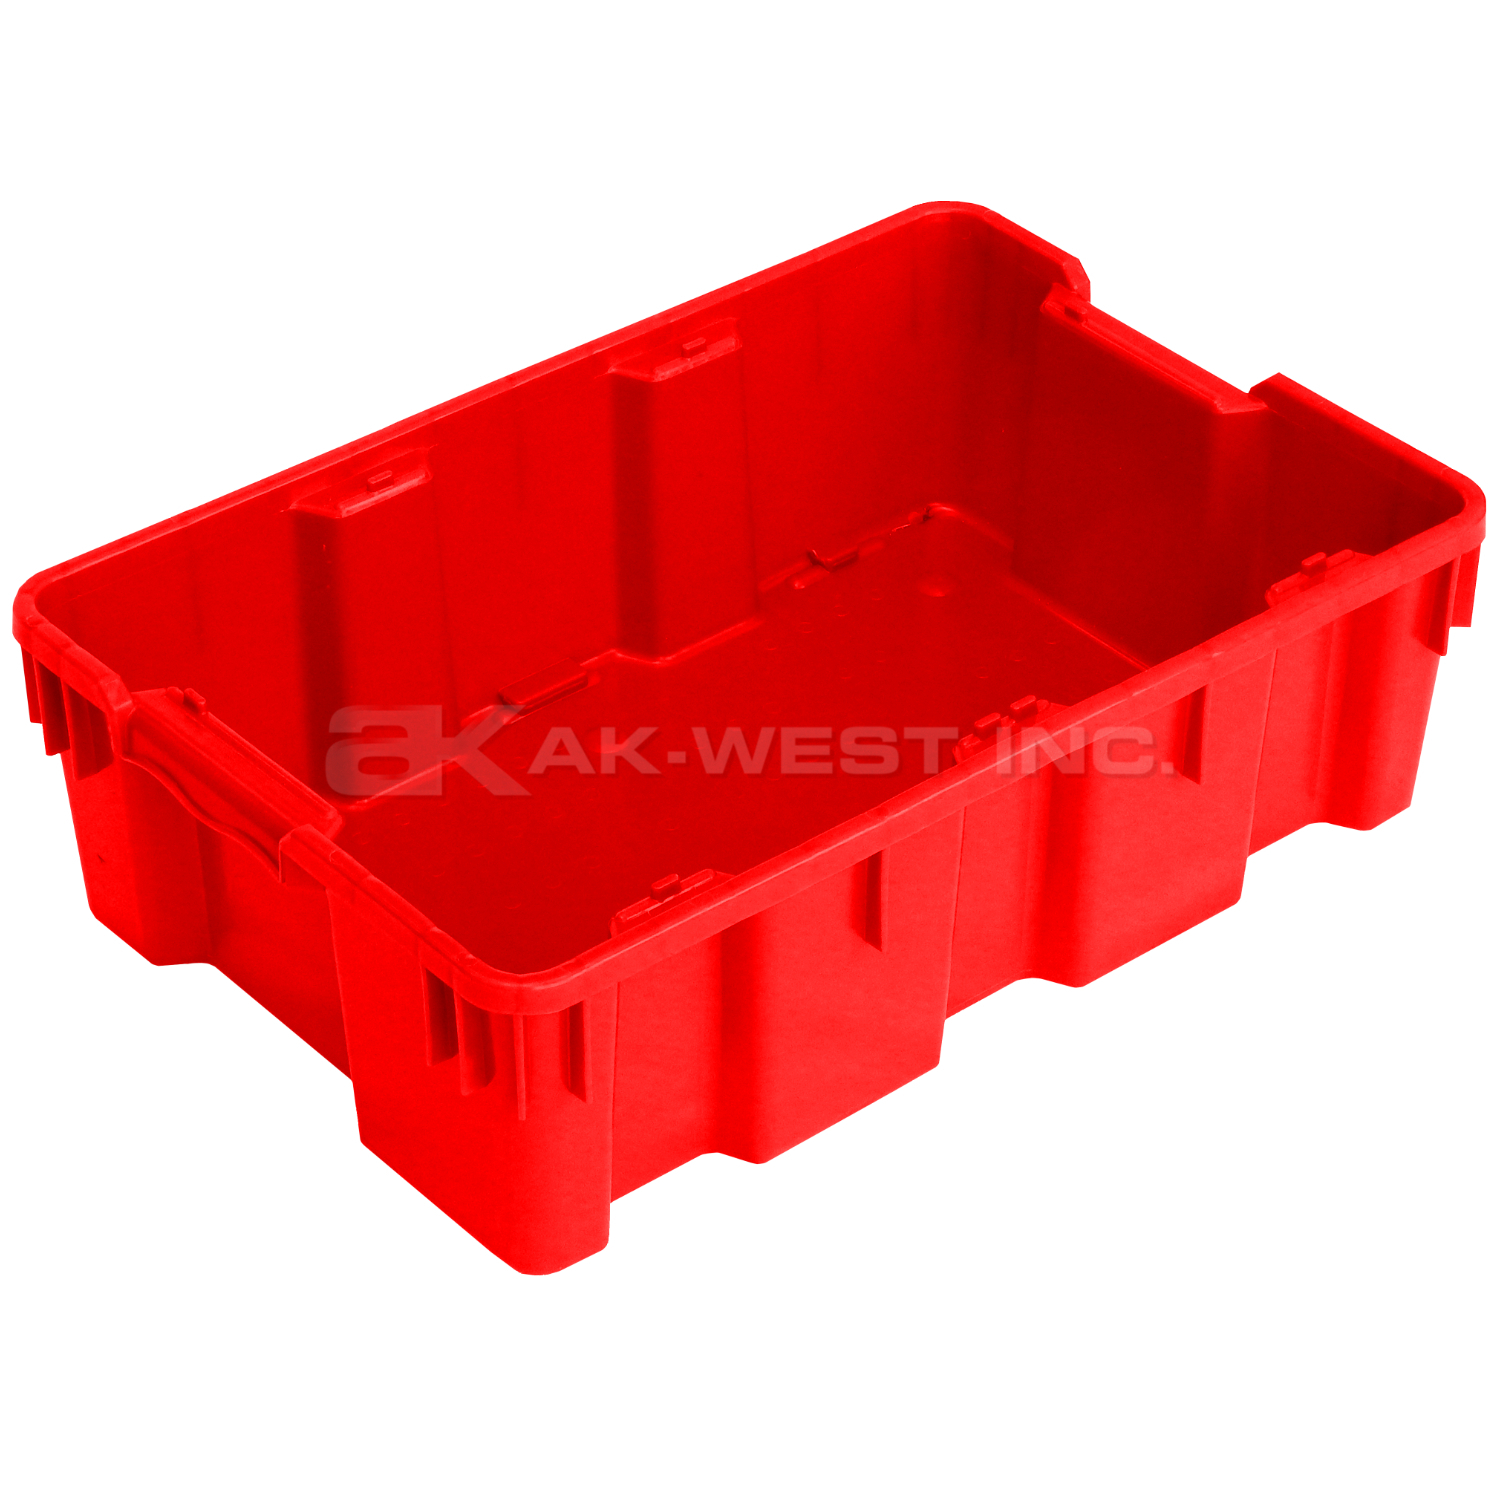 Red, 24"L x 16"W x 7"H Stack and Nest Container w/ Solid Sides and Base